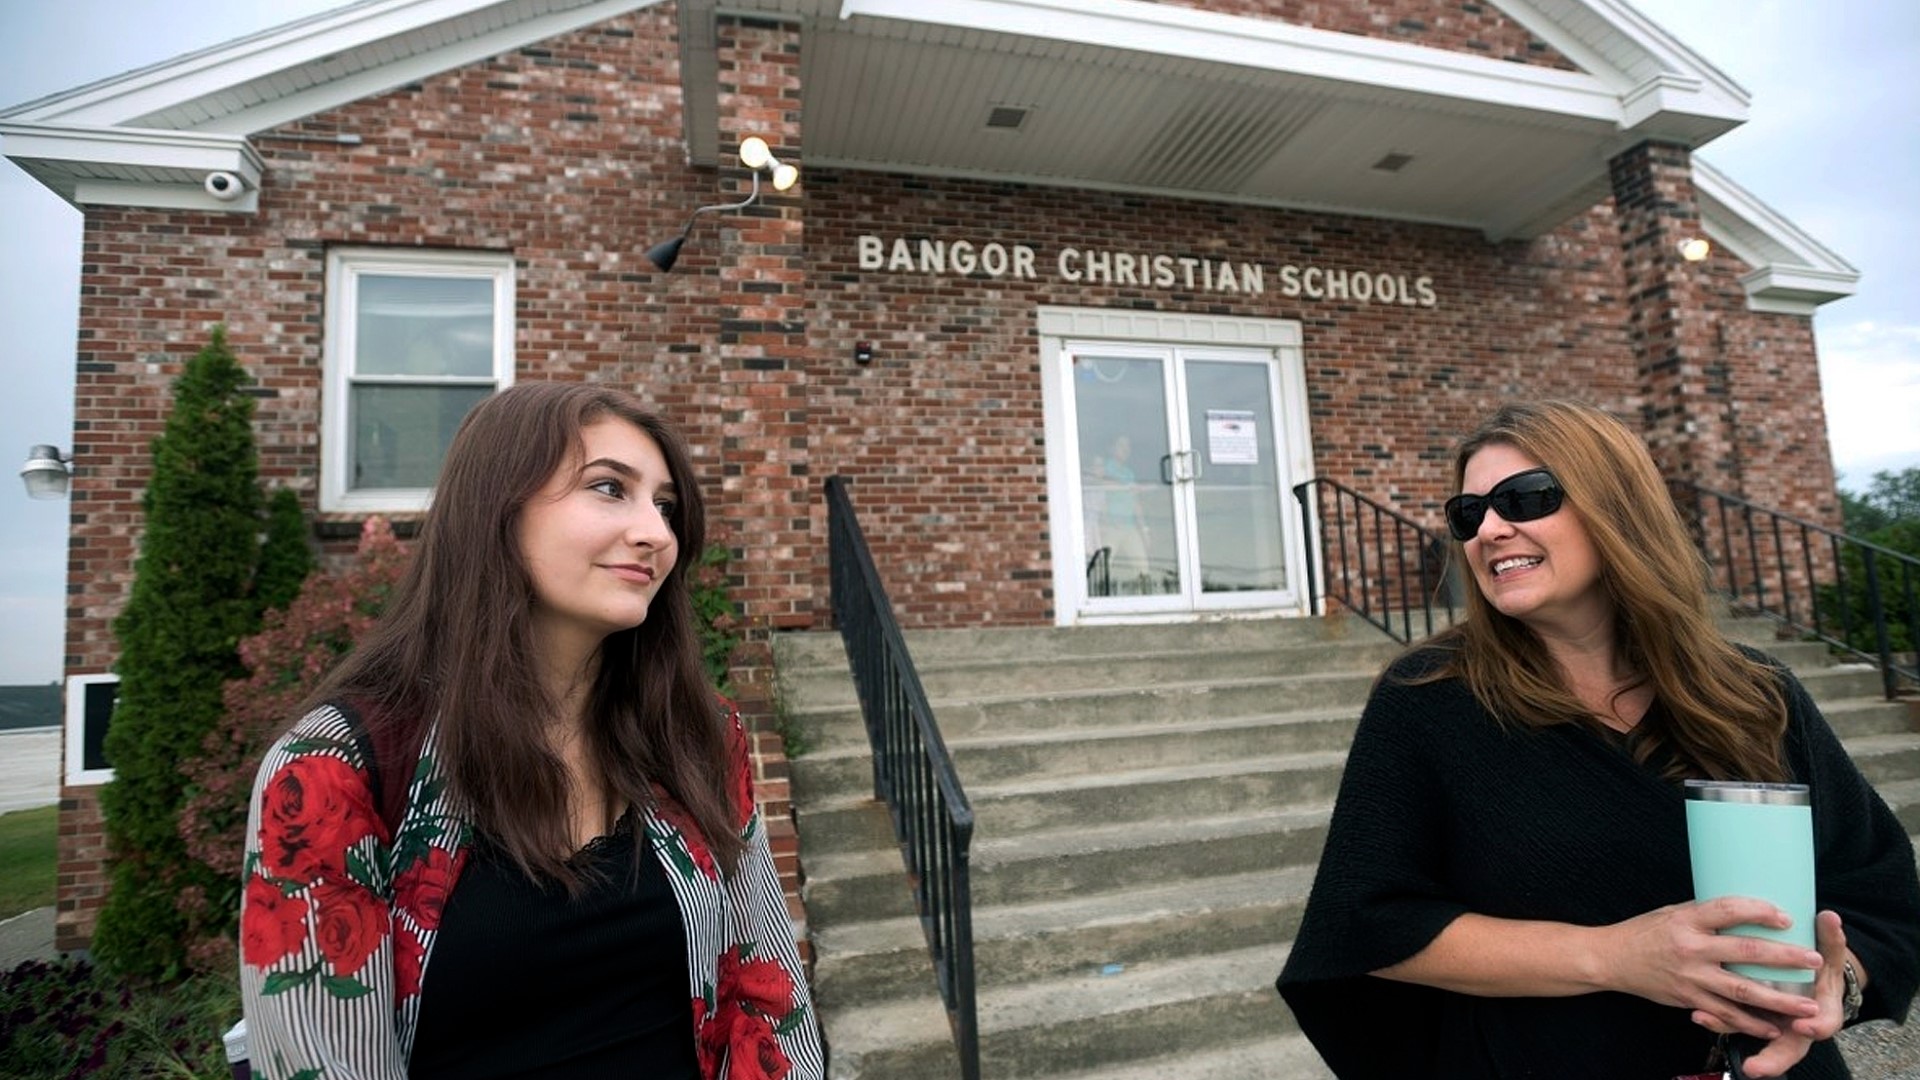 The lawsuit, filed Monday, contends the law discriminates against religious schools by imposing restrictions that specifically aim to keep them out of the program.